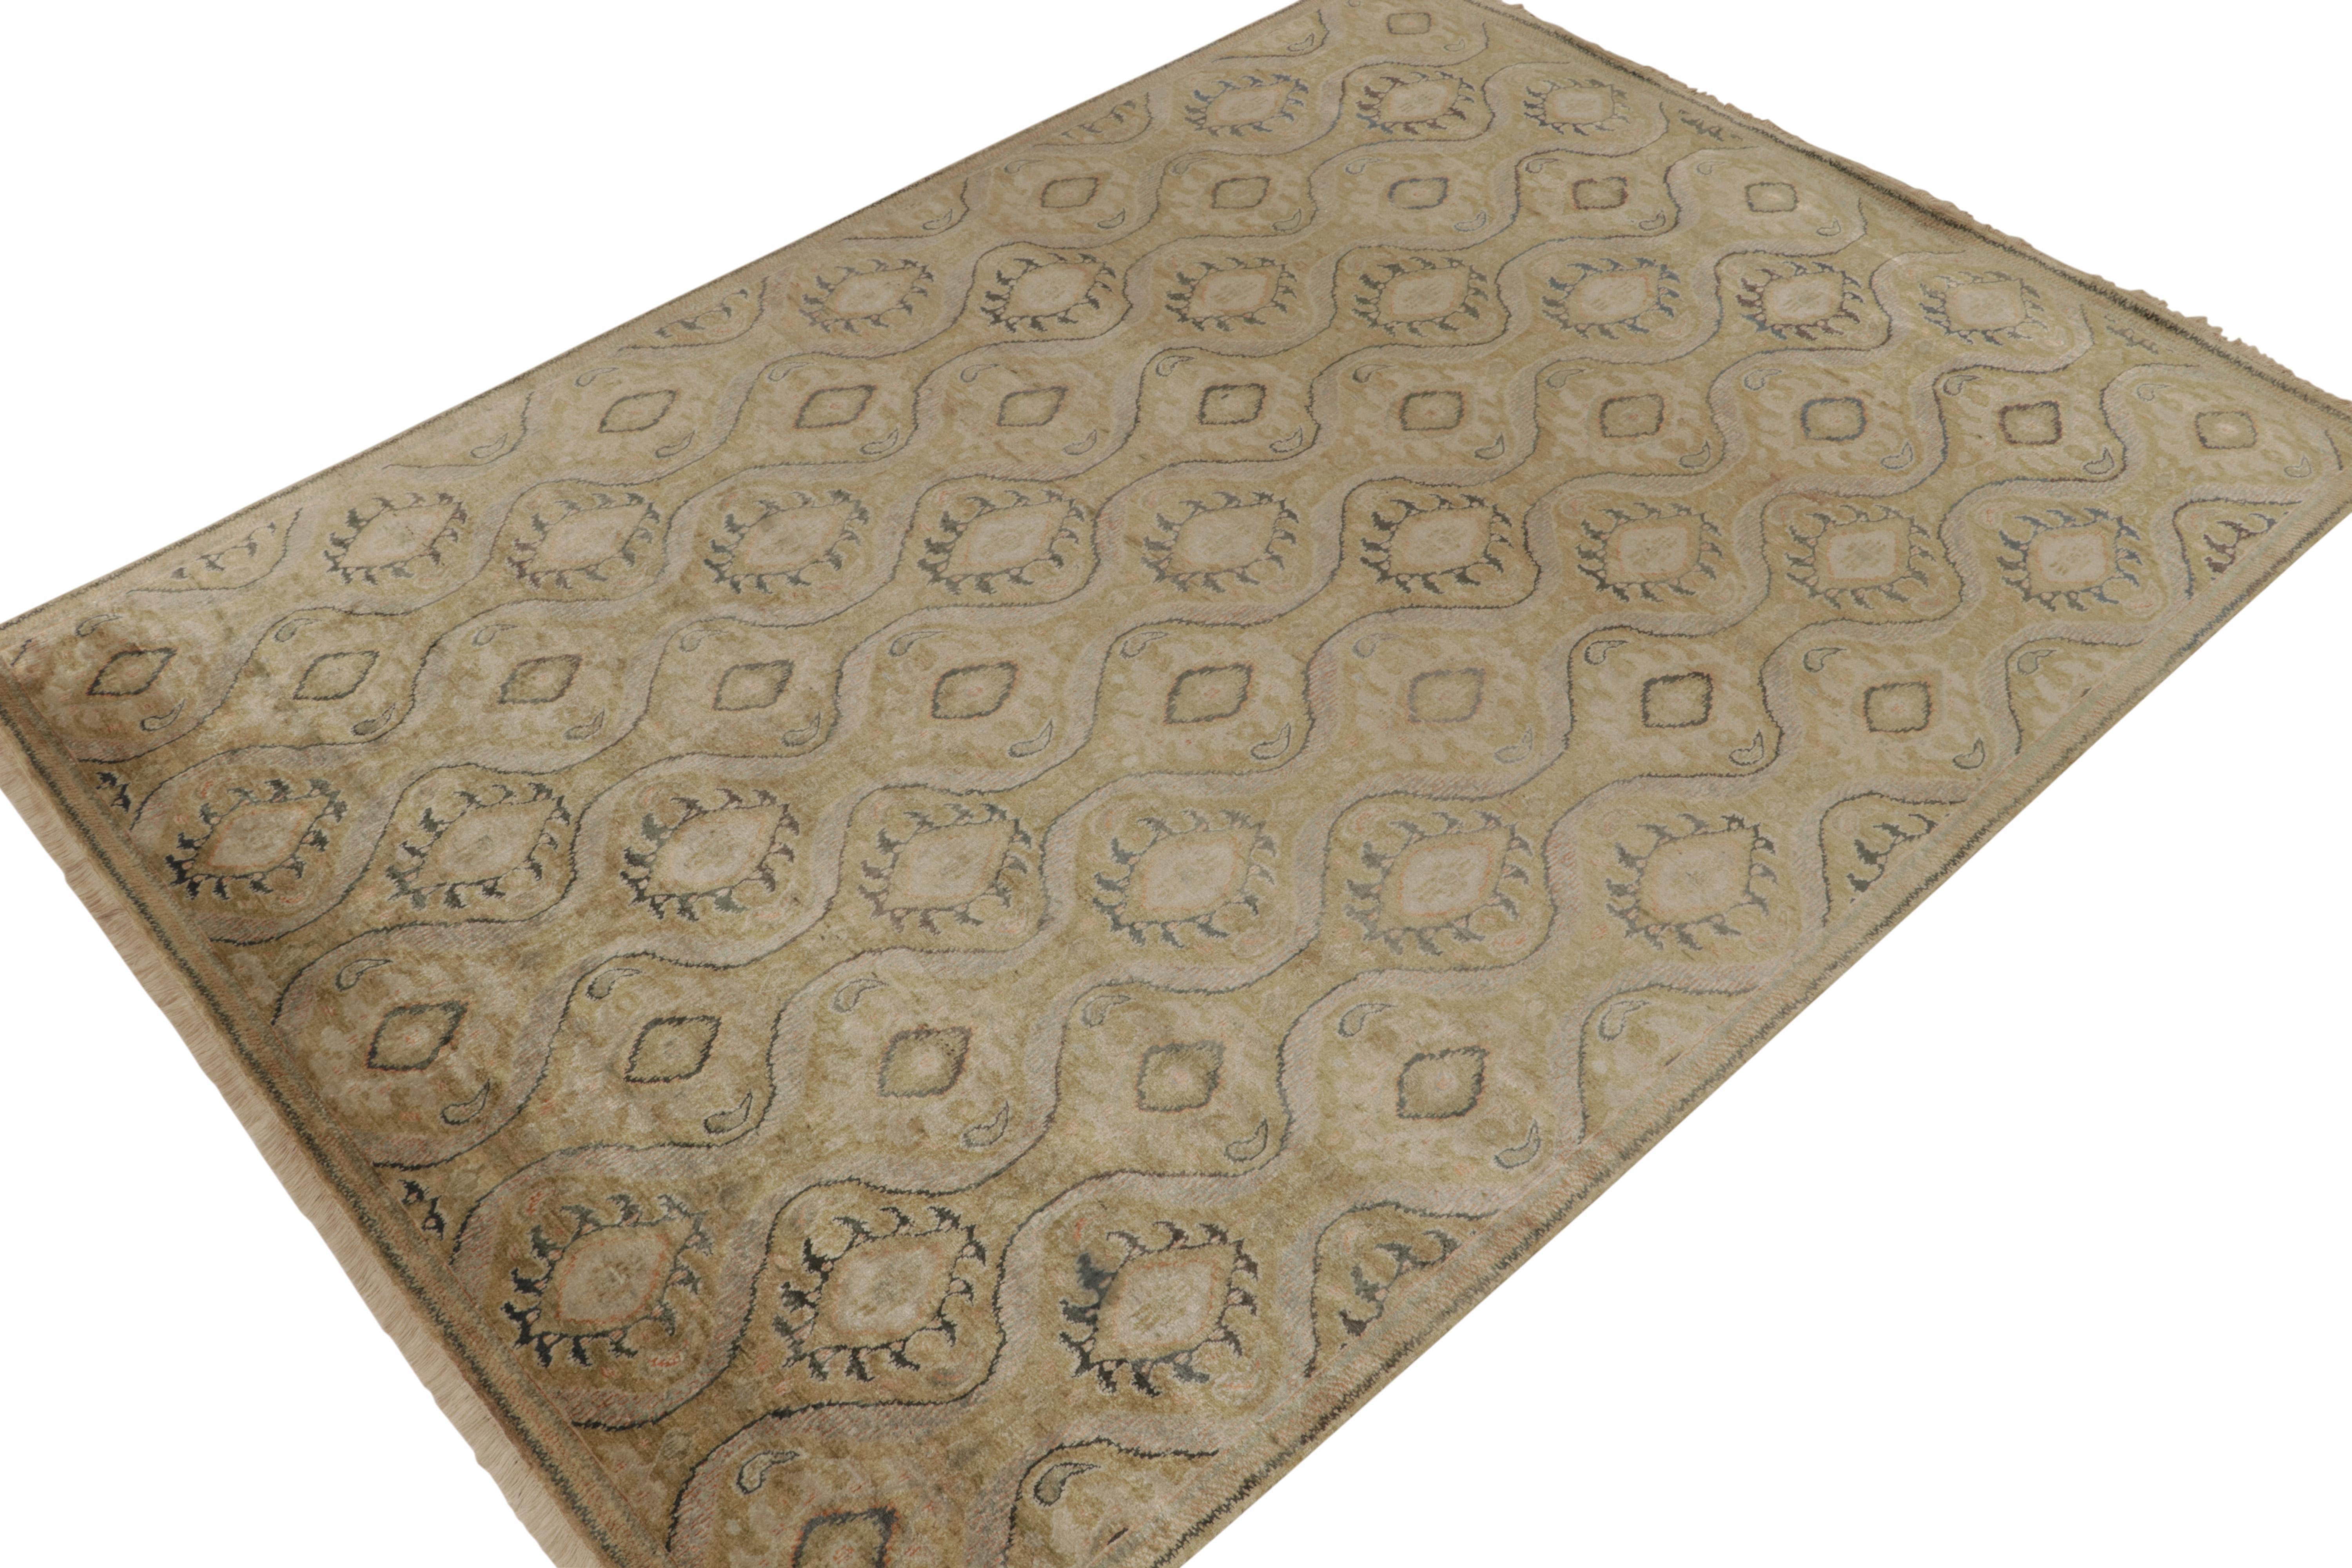 Hand-knotted in silk, this 9x12 rug from our Modern Classics collection is an inventive celebration of classic Ikats patterns.

On the Design: Curvaceous, finely detailed patterns enjoy a gorgeous golden-beige, with blue accents and a green